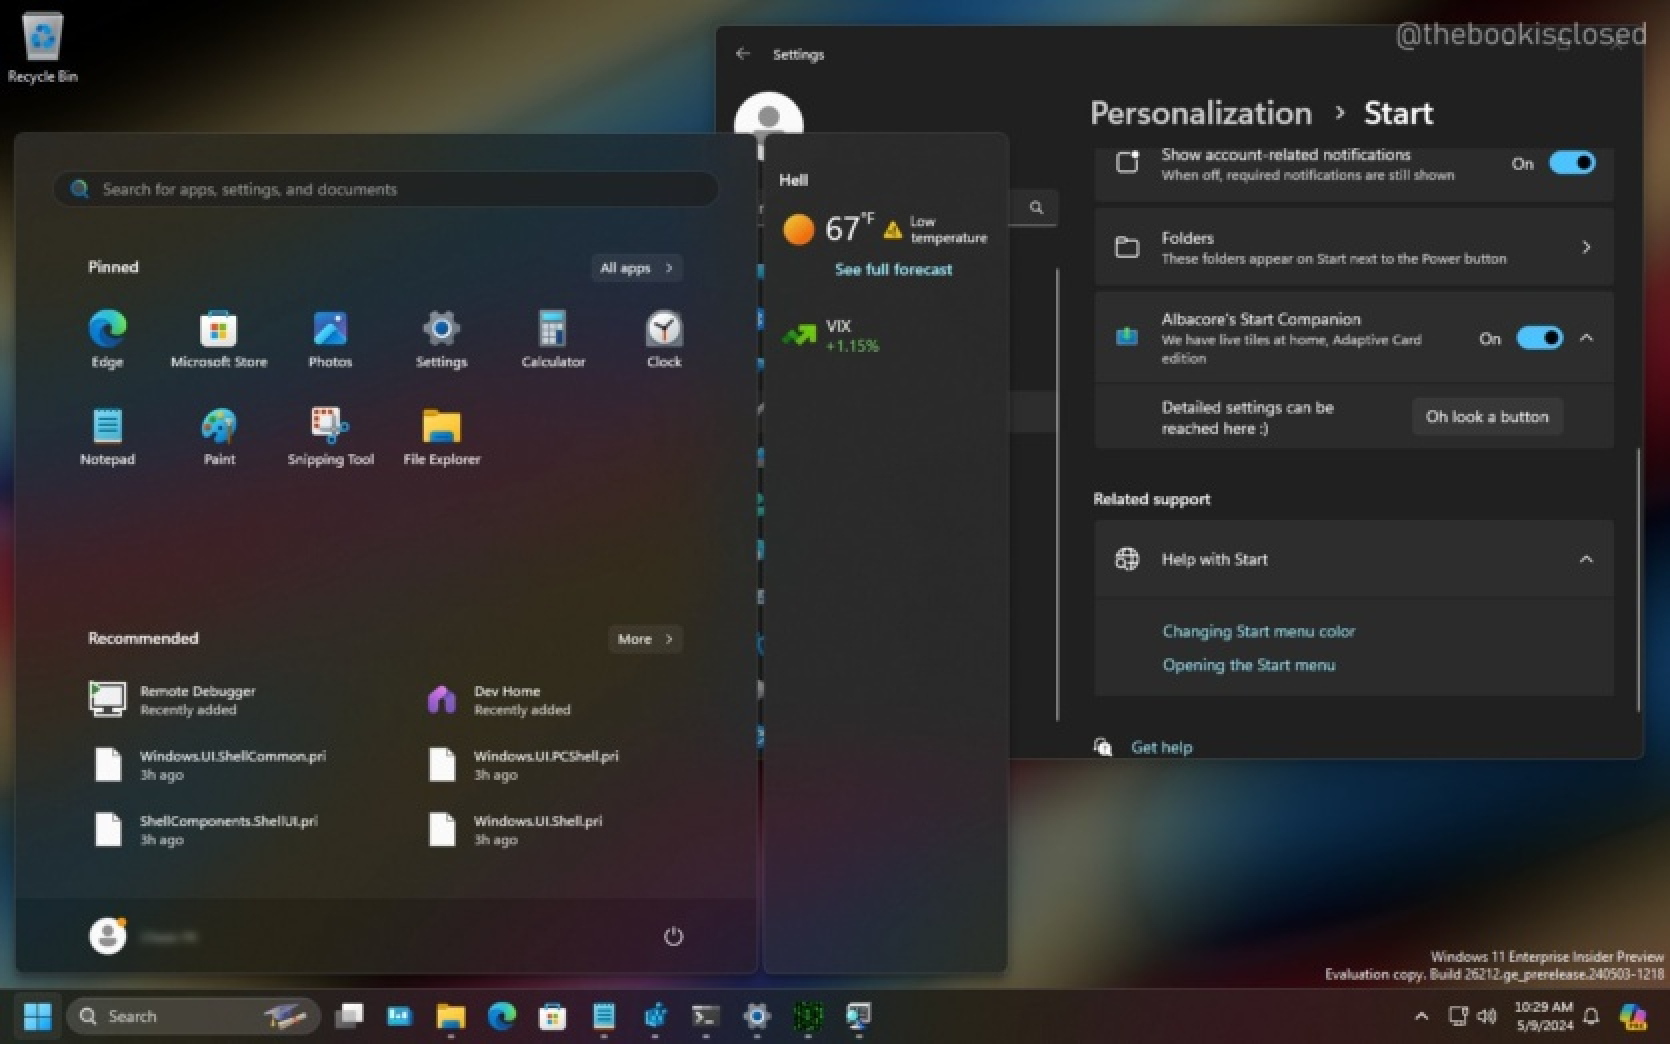 Microsoft is testing Windows 11's new Start menu with floating widgets and QR code recognition in Scissors